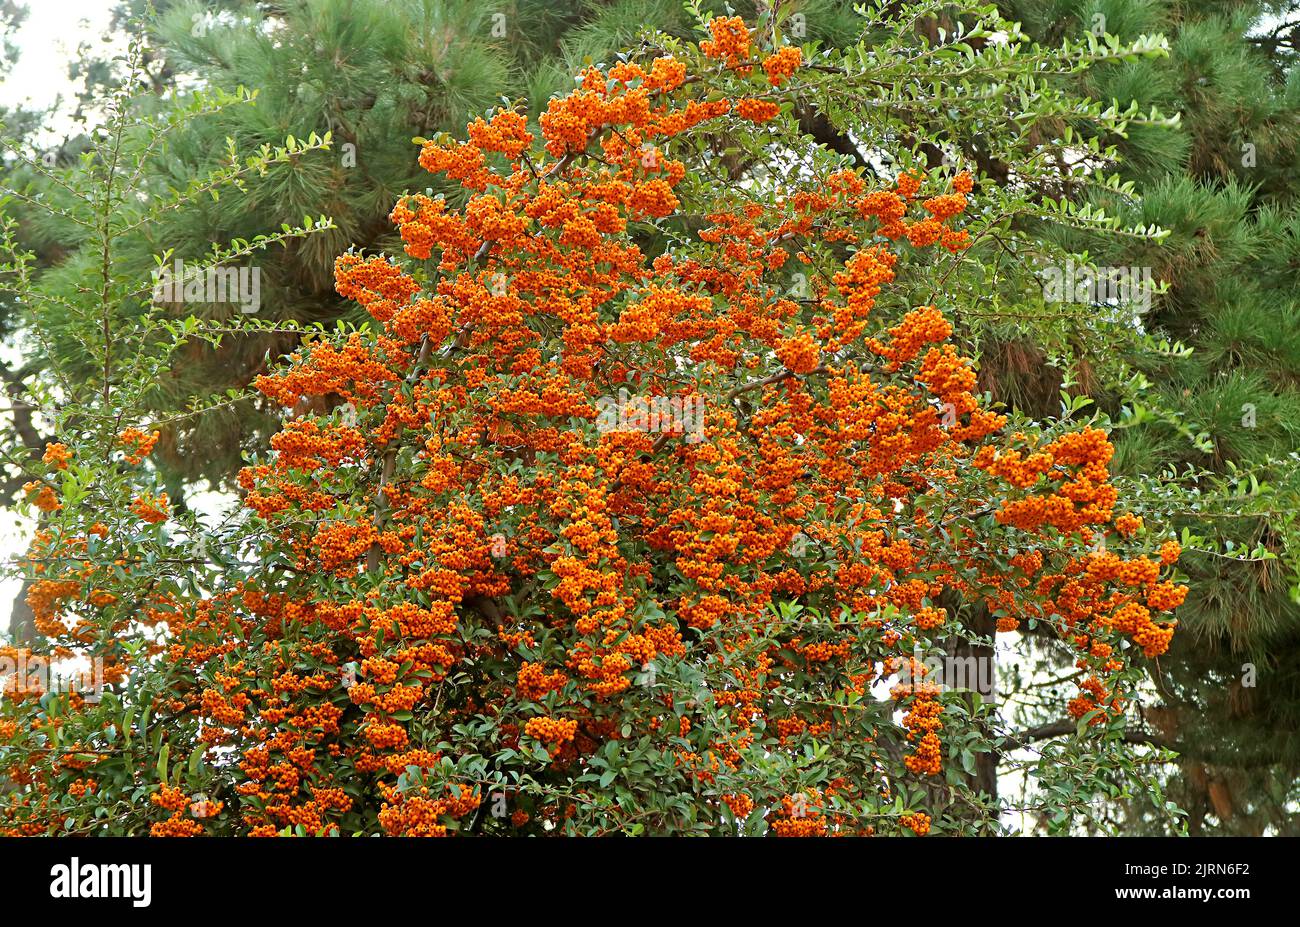 Bunches of Vivid Orange Berries of Firethorn or Pyracantha Growing on the Fence Stock Photo